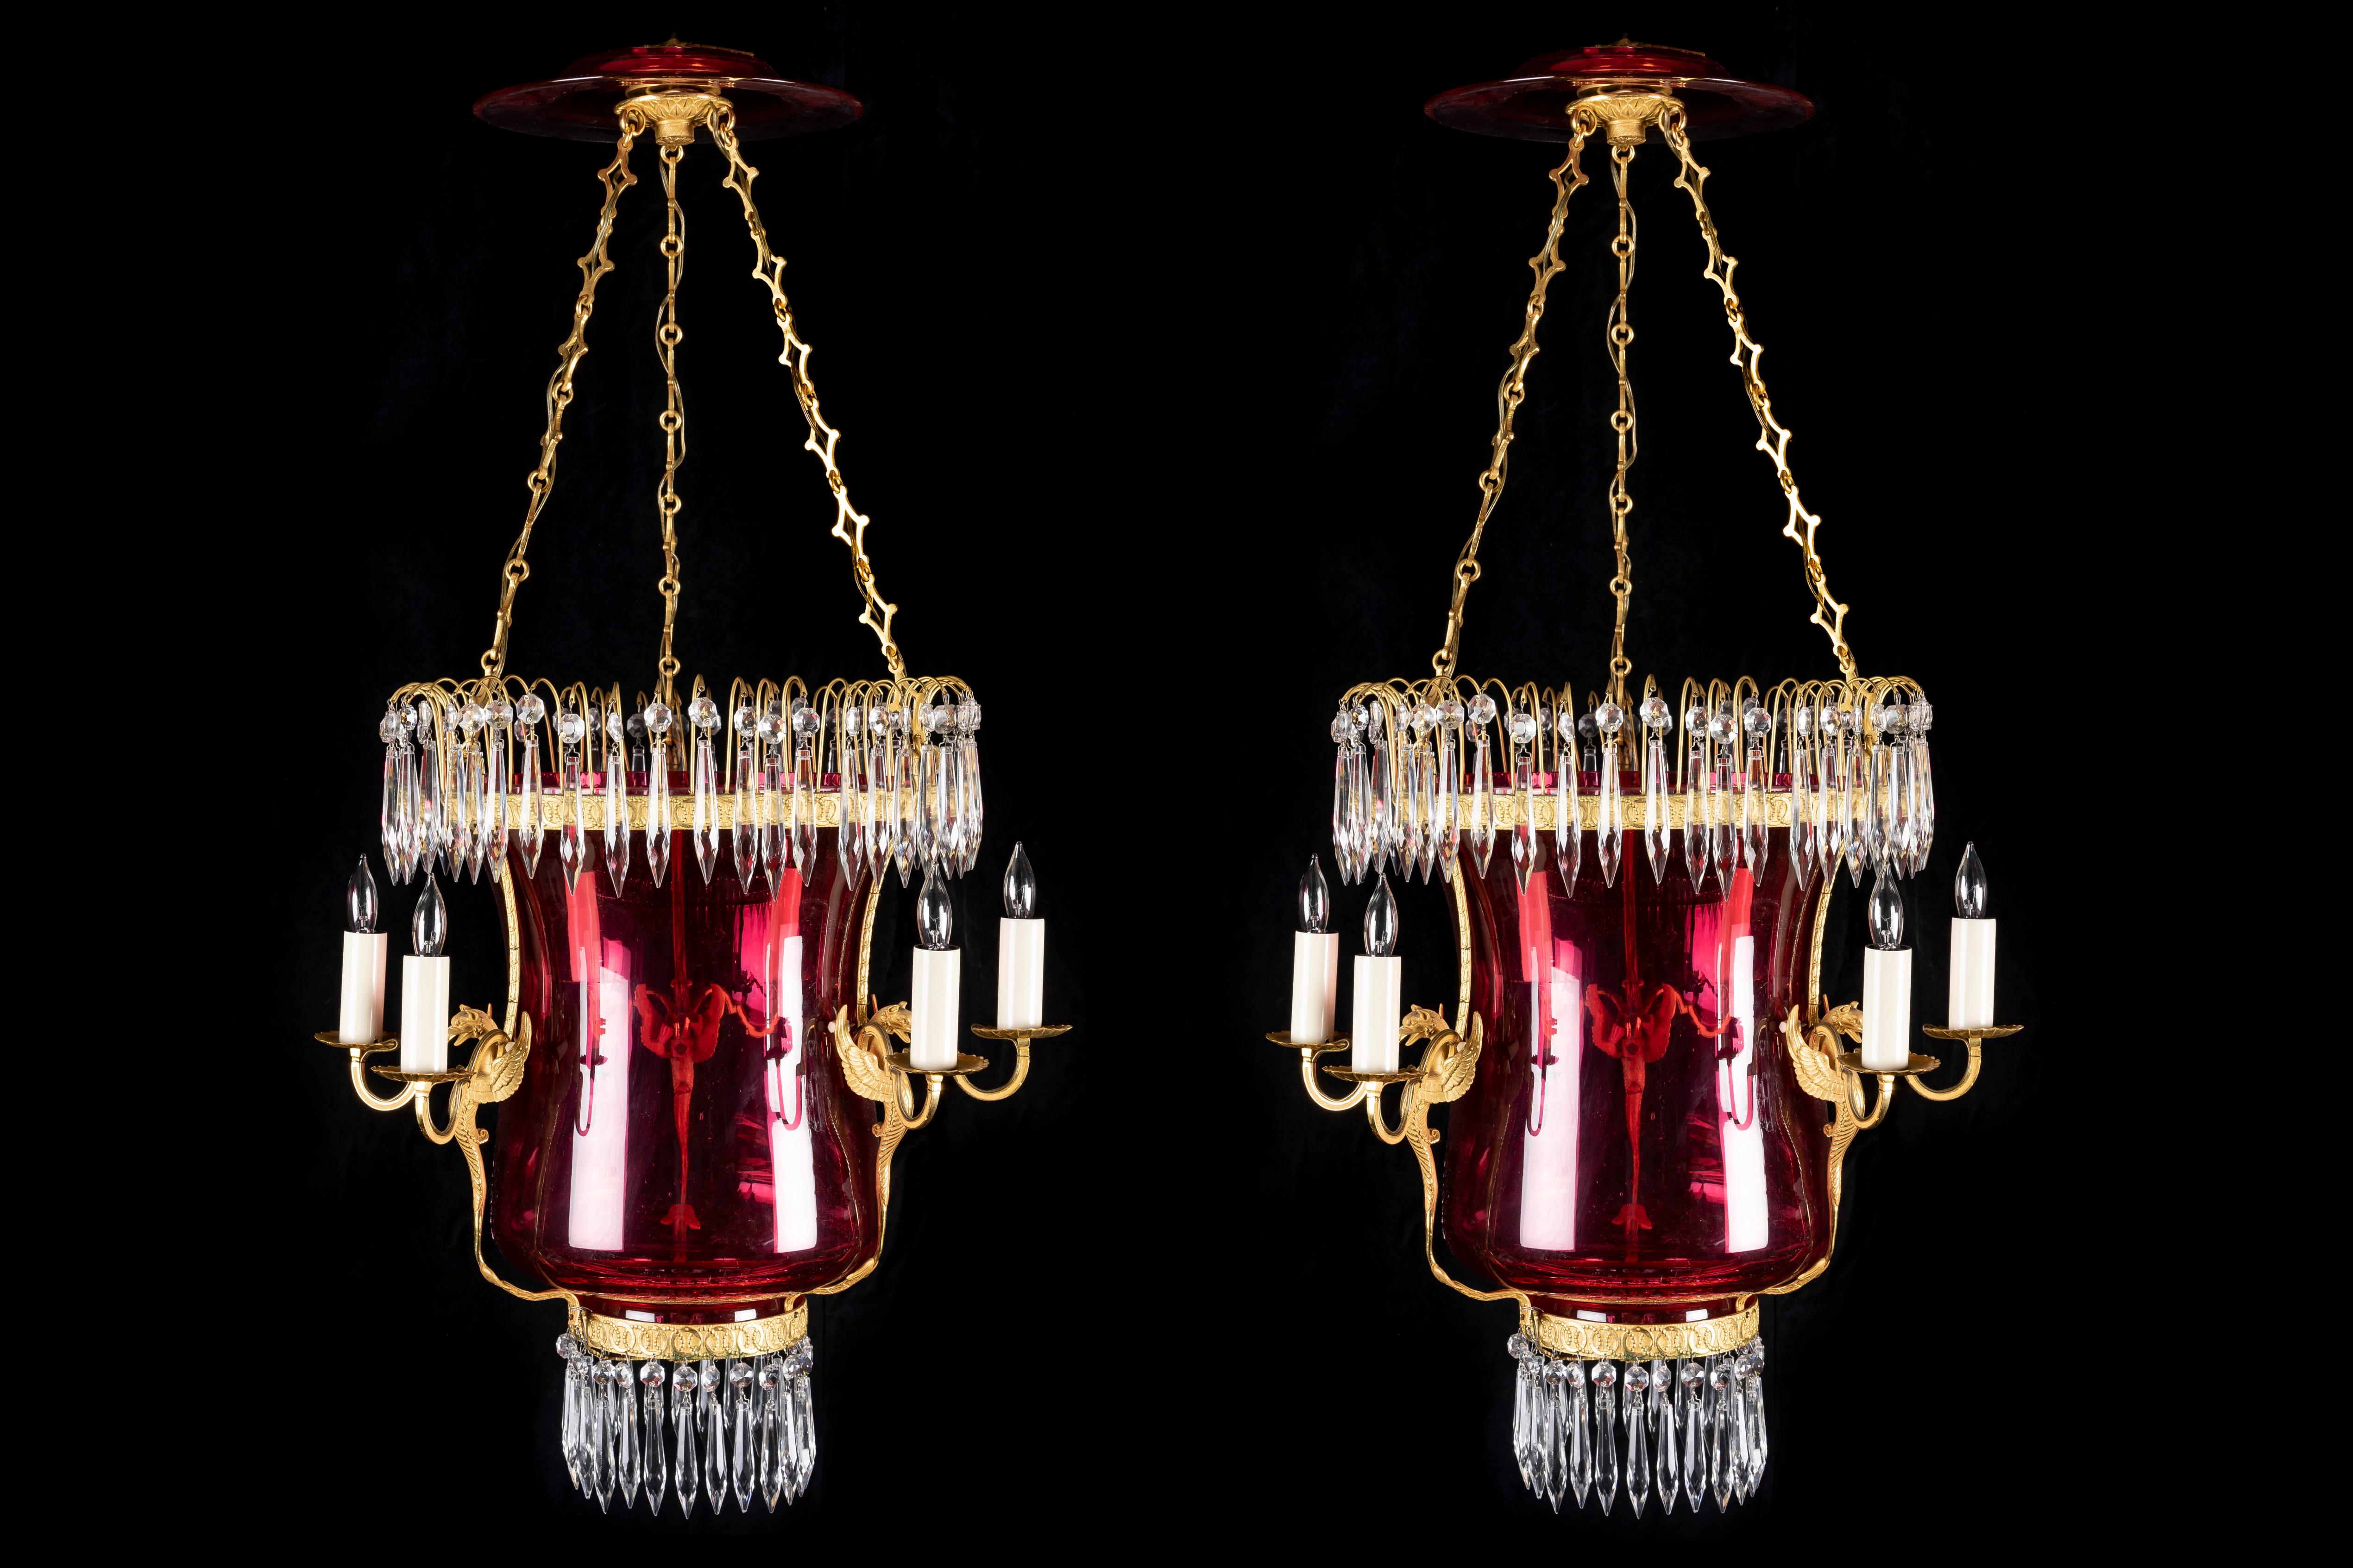 A Pair of Magnificent Large Antique Russian Neoclassical gilt bronze, cranberry glass and cut crystal multi light lantern chandeliers of exquisite craftsmanship. Each  unusual lantern is embellished with a fine Russian cranberry glass bell jar